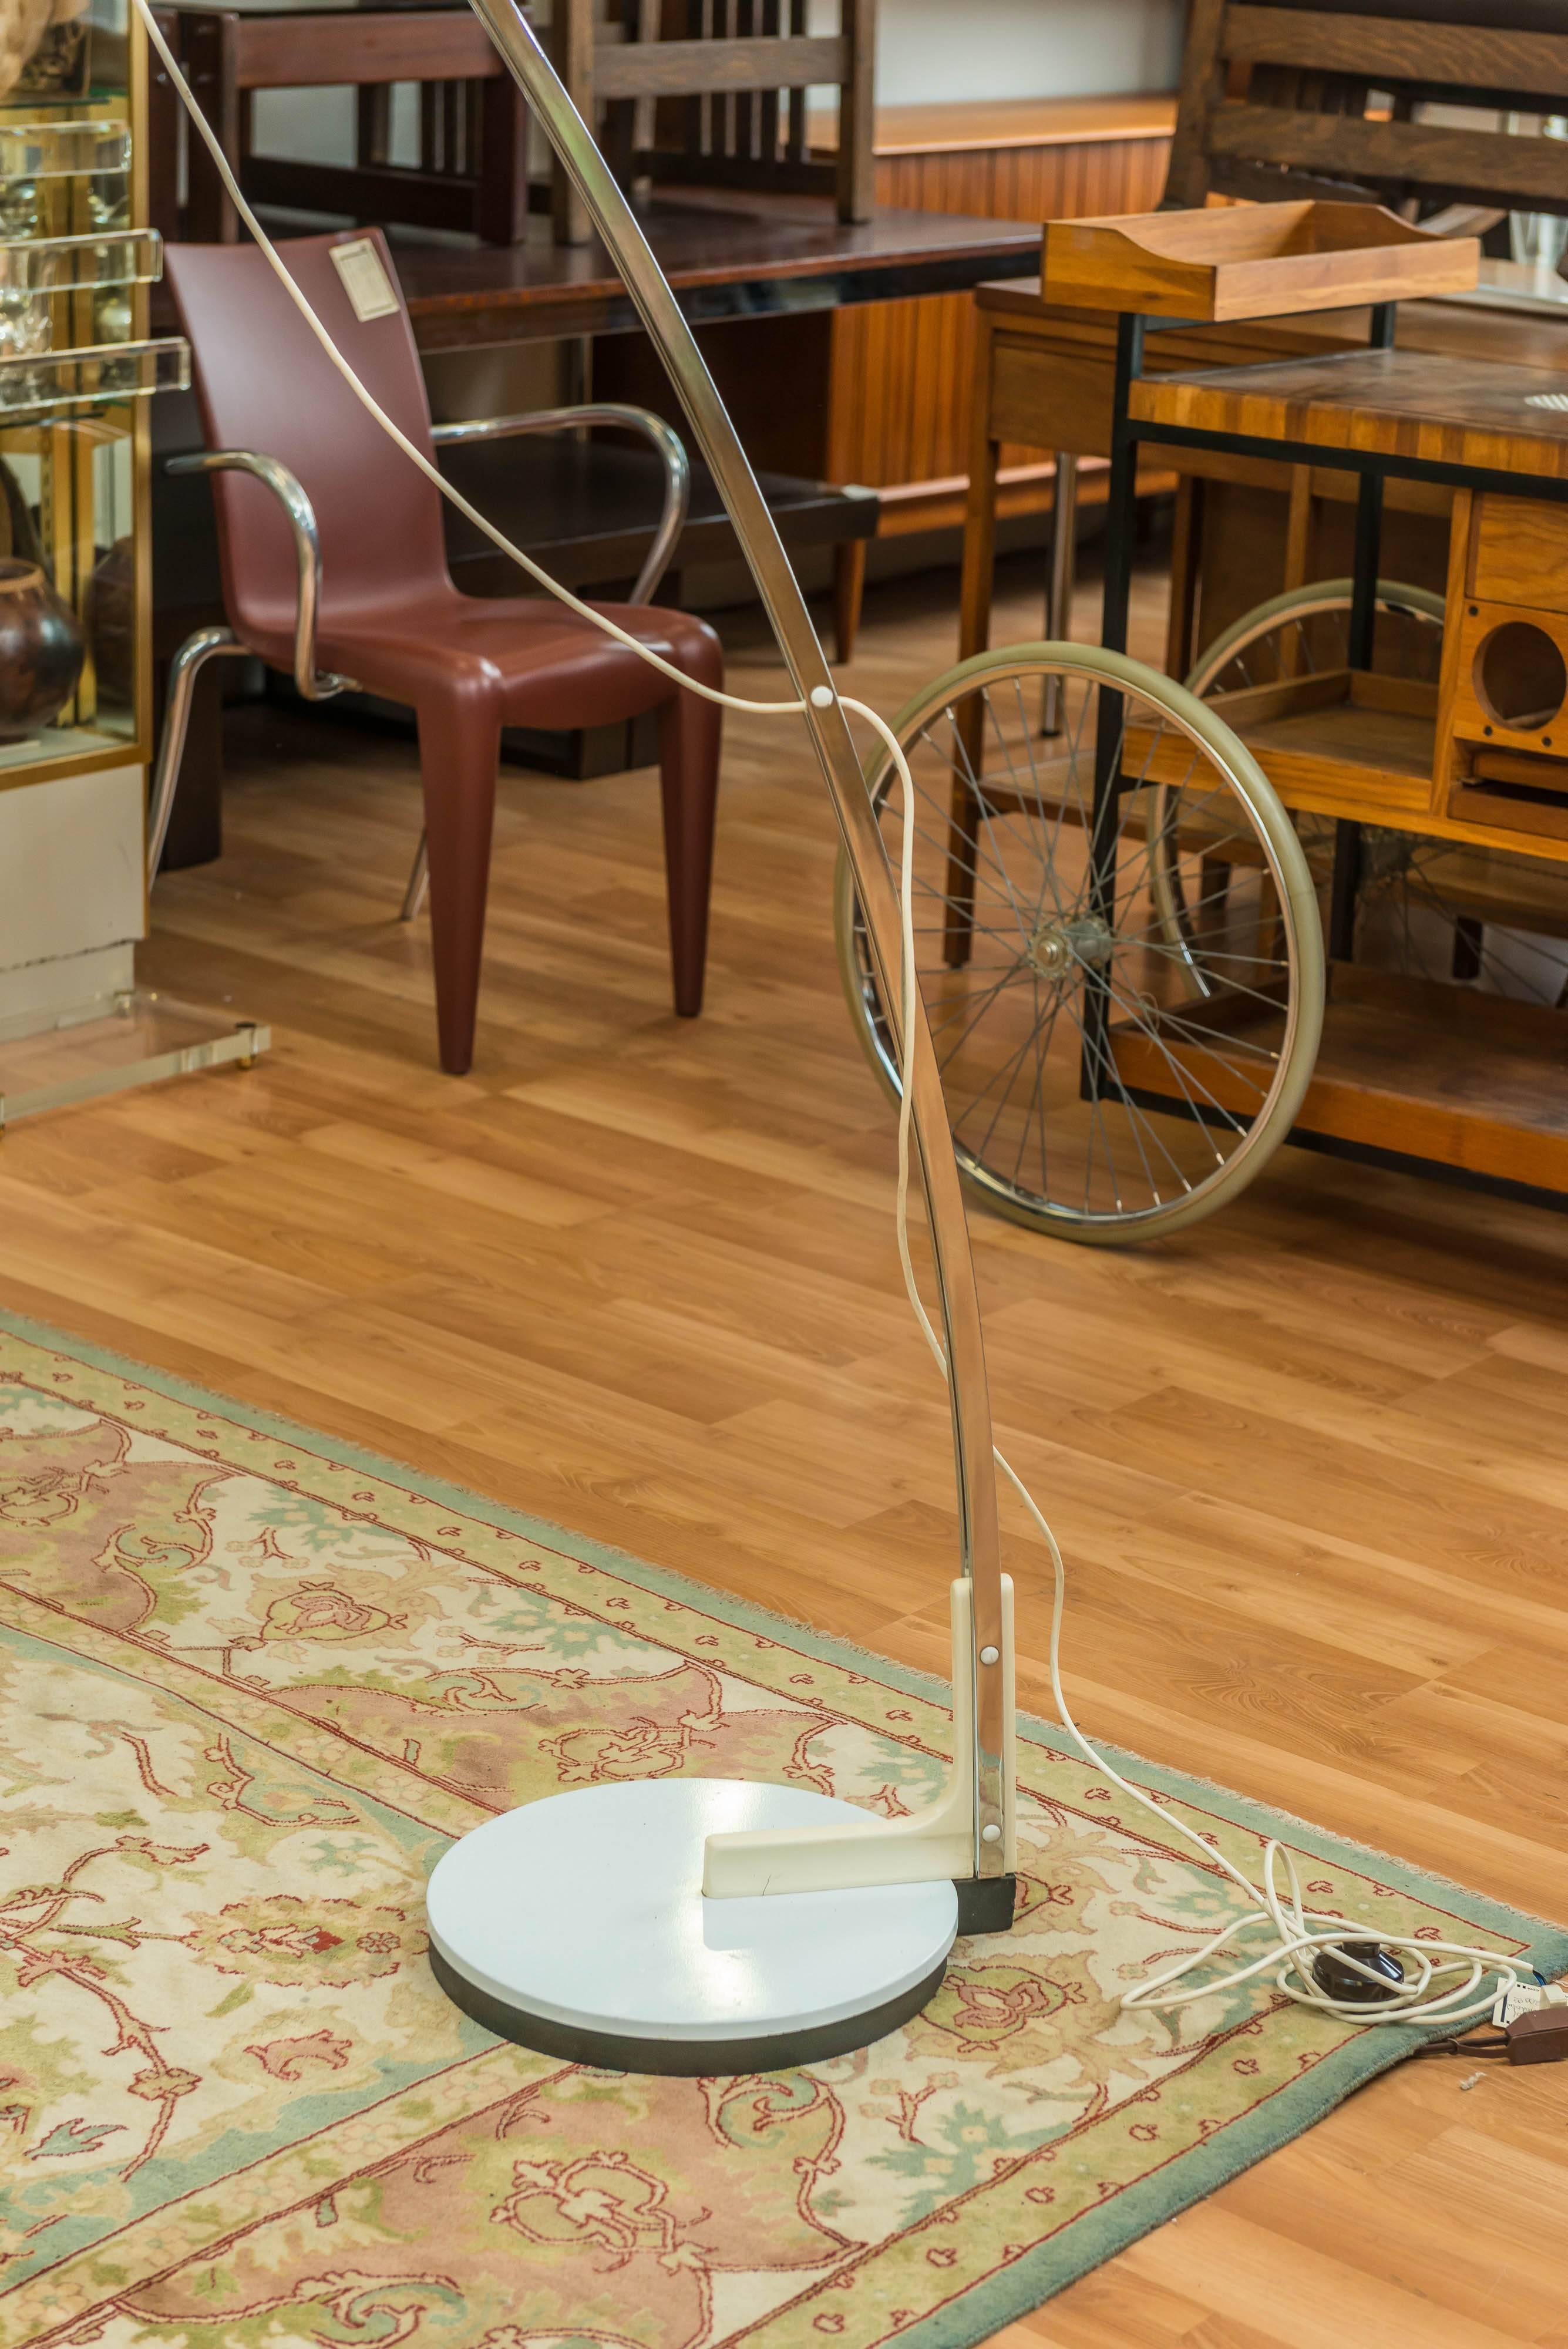 Large Goffredo Reggiani Italian arc floor lamp (stamped Reggiani on the underside base), Extendable/adjustable aluminum arm (arm in about 82in, out about 112in) with it's original perspex shade at it's end. Base is cast iron with painted cover.